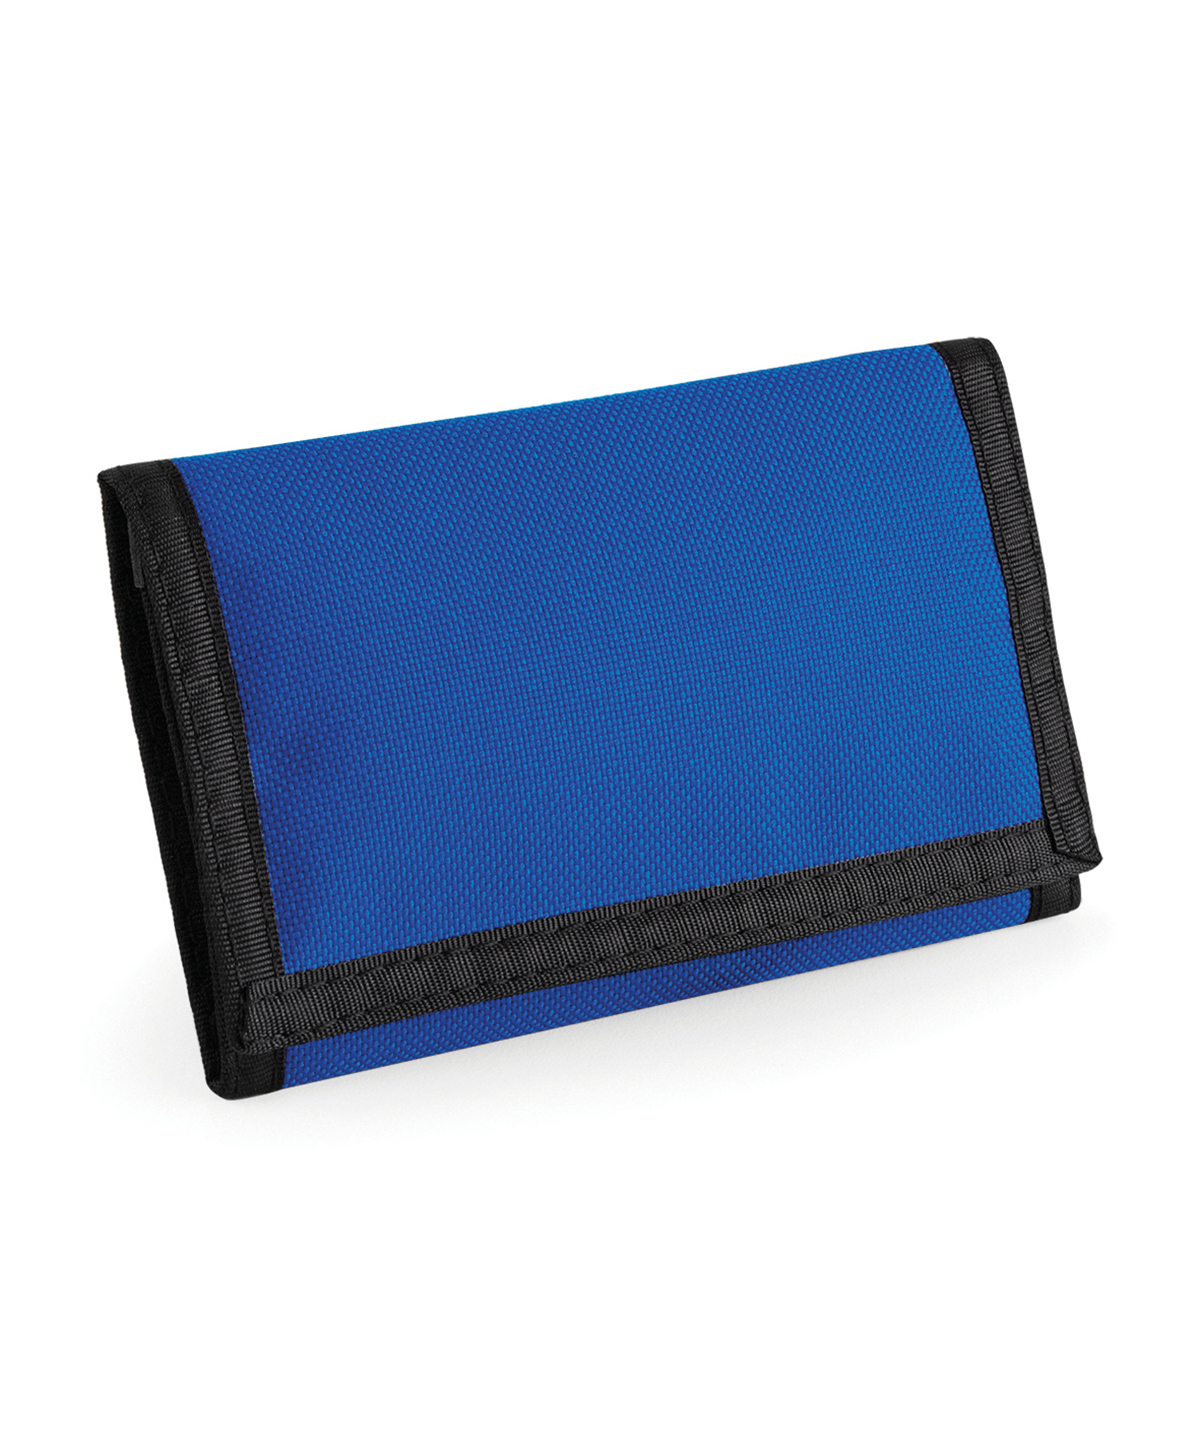 Ripper Wallet Bright Royal Size One Size